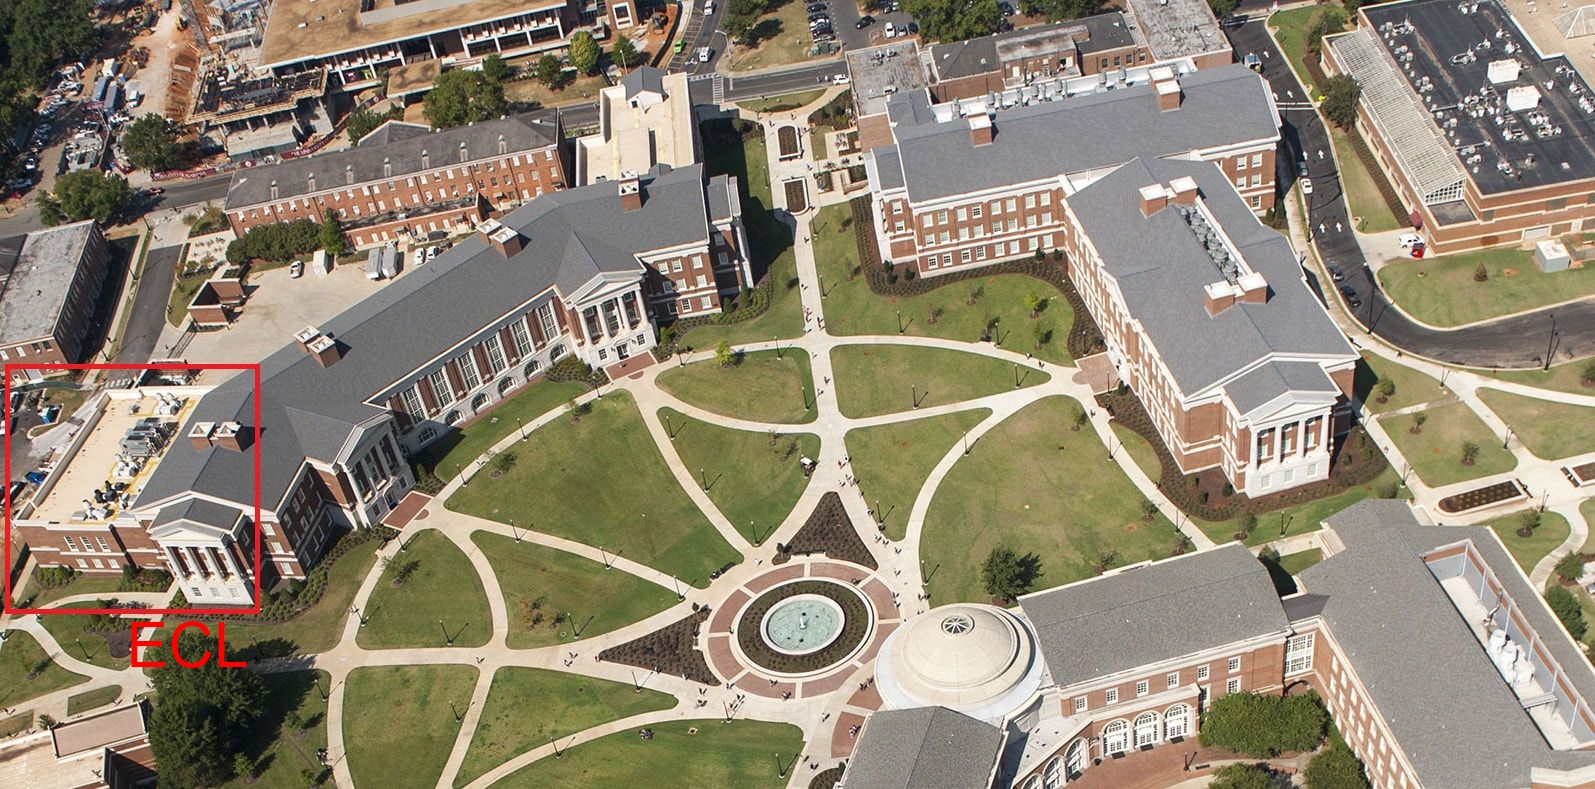 Arial view of Engineering Quad at UA showing ECL location.